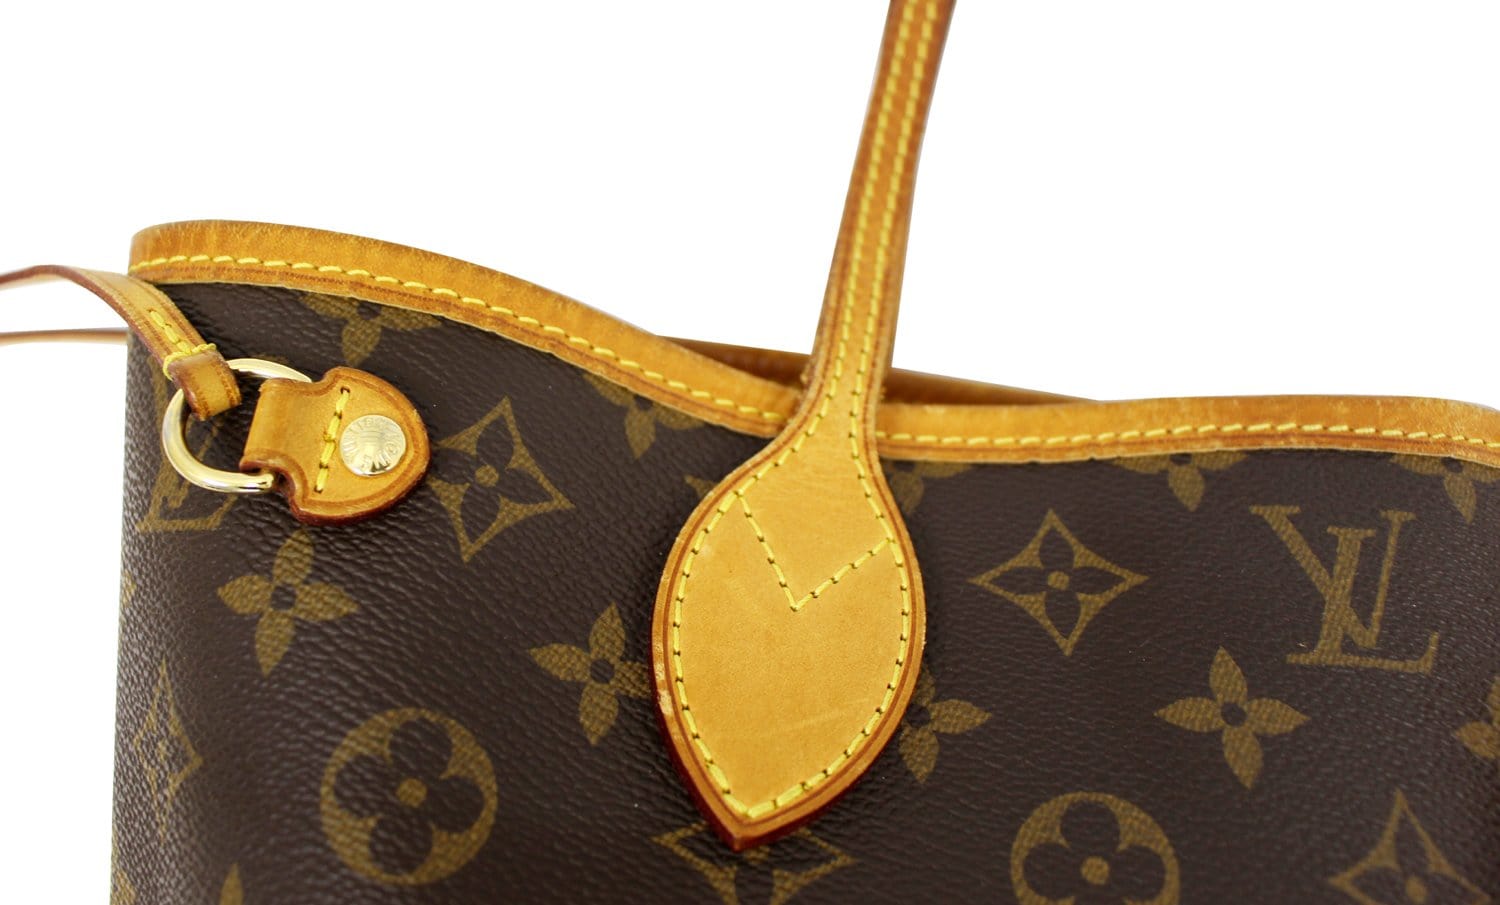 Louis Vuitton Neverfull Tote Bags (TDPC)